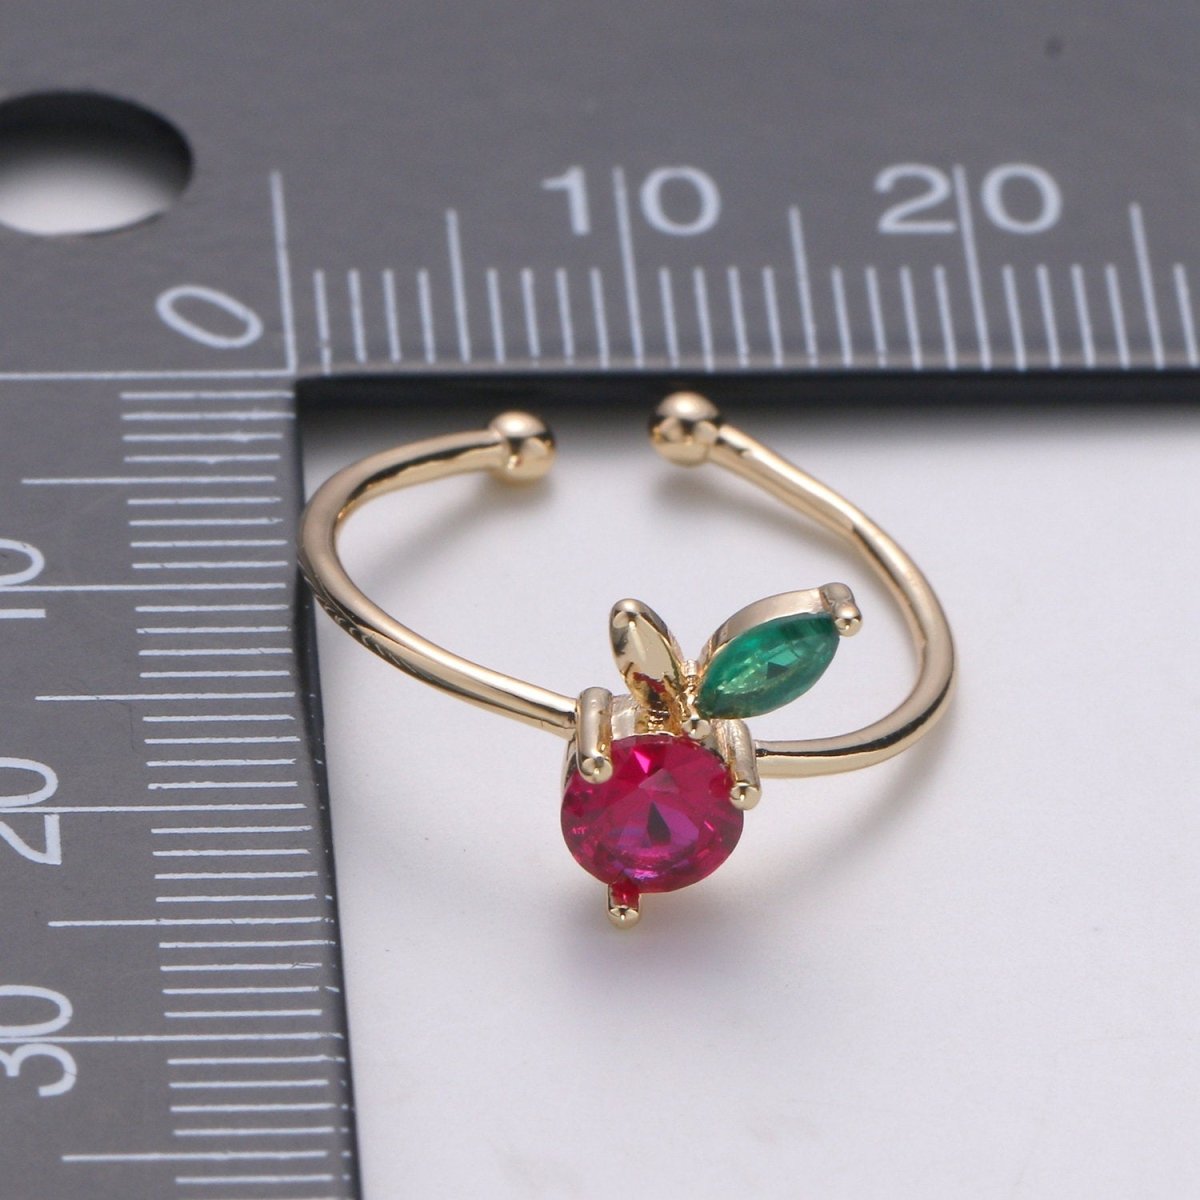 Dainty Fruit ring, Gold Mini Fruit Ring, Dainty Stackable Rings, Open Adjustable Ring Crystal Tropical Fruits, Red Cherry Ring R-115 - DLUXCA